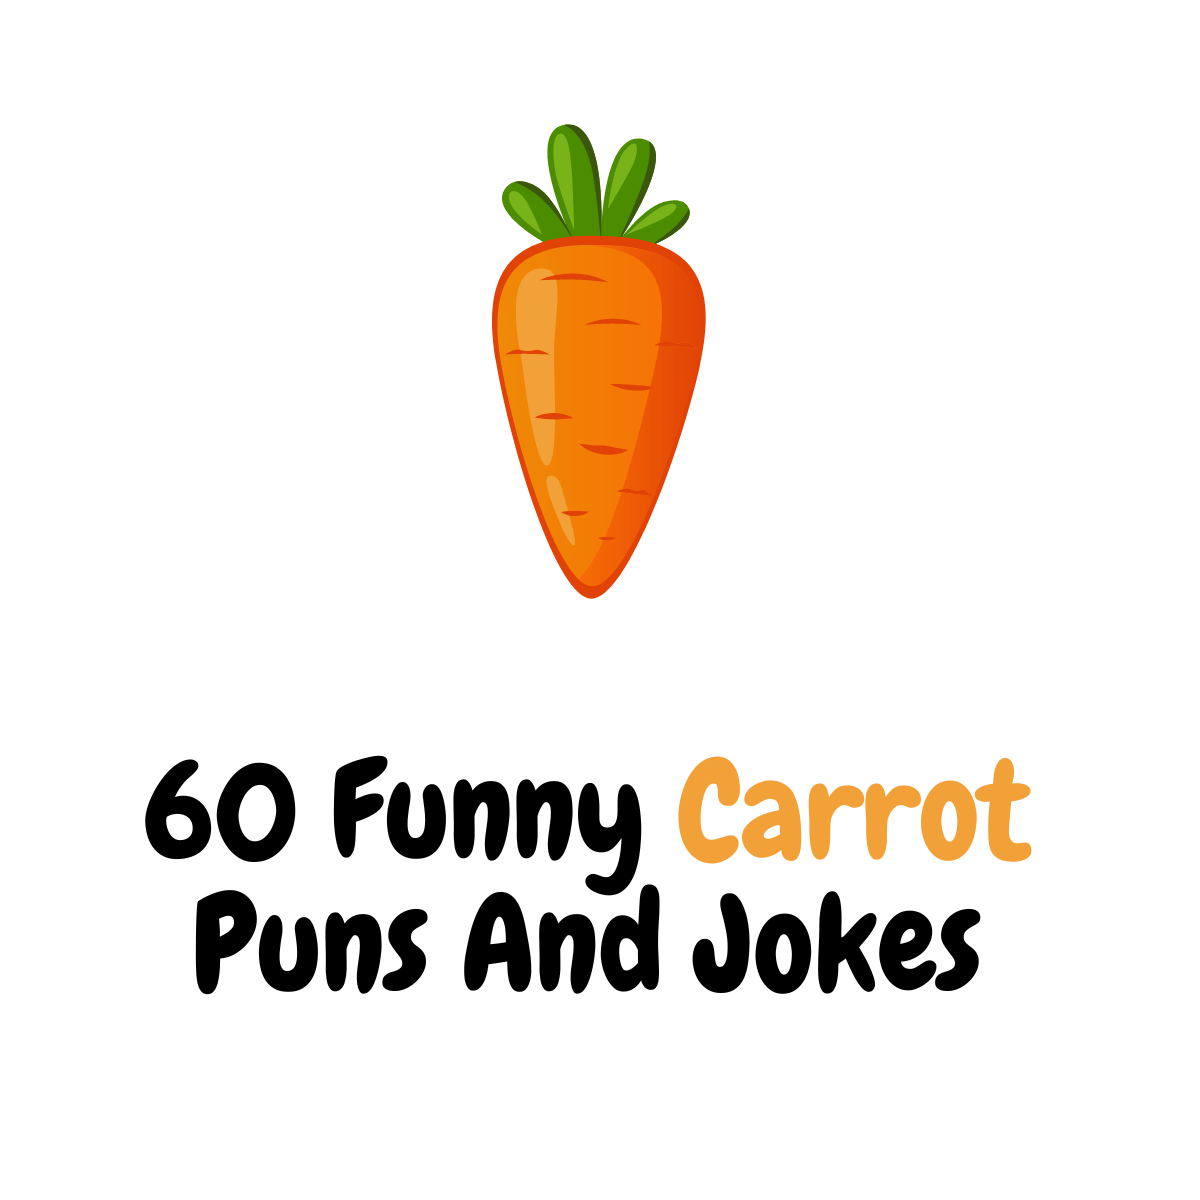 60+ Funny Carrot Puns And Jokes: Cracking Up with Carrots